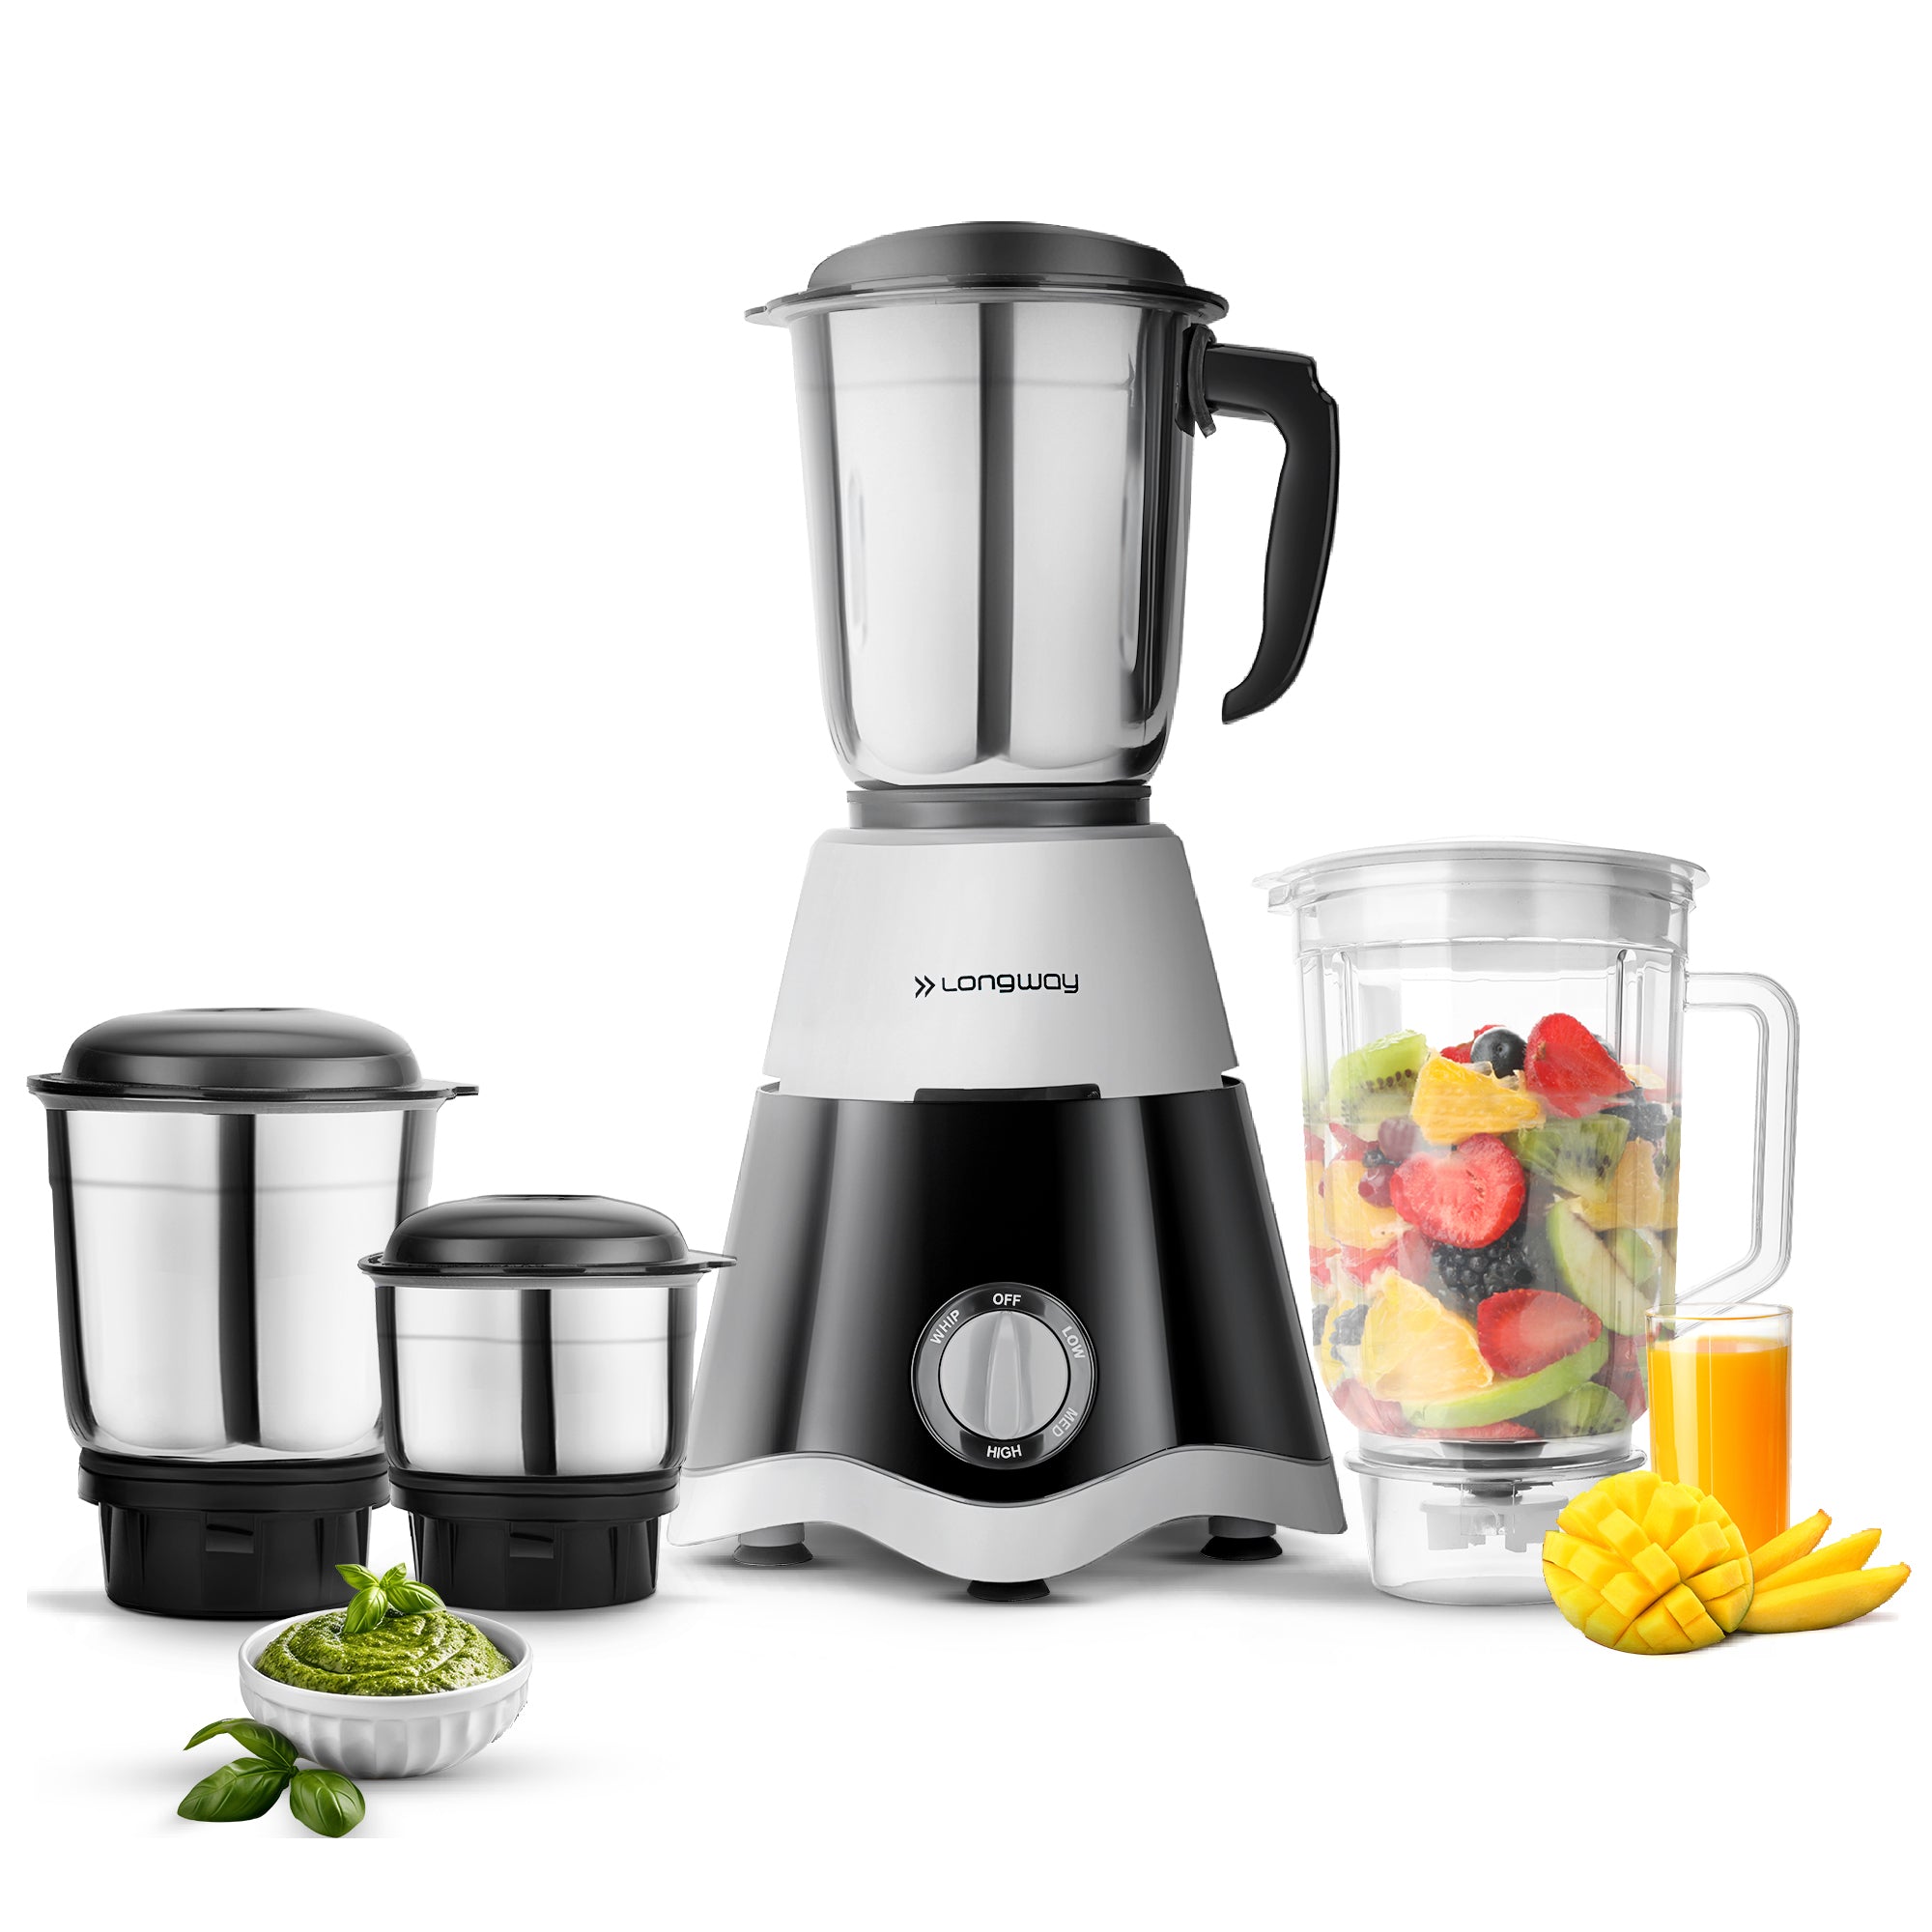 Longway Super Dlx 750 Watt Juicer Mixer Grinder with 4 Jars for Grinding, Mixing, Juicing with Powerful Motor | 1 Year Warranty | (Black & Gray, 4 Jars)